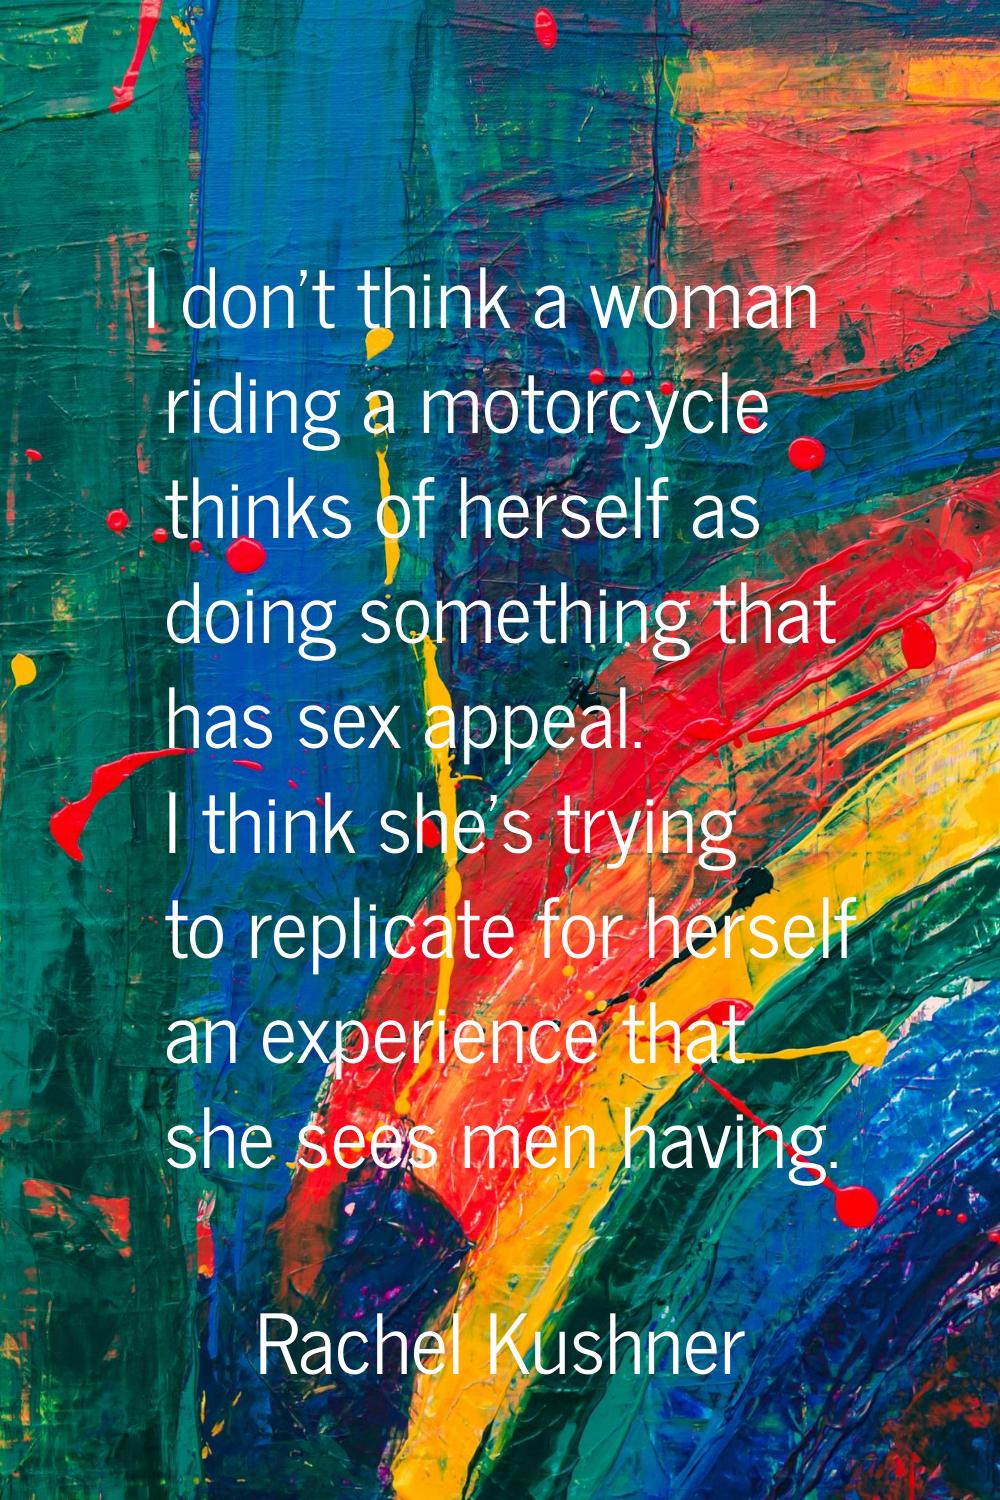 I don't think a woman riding a motorcycle thinks of herself as doing something that has sex appeal.